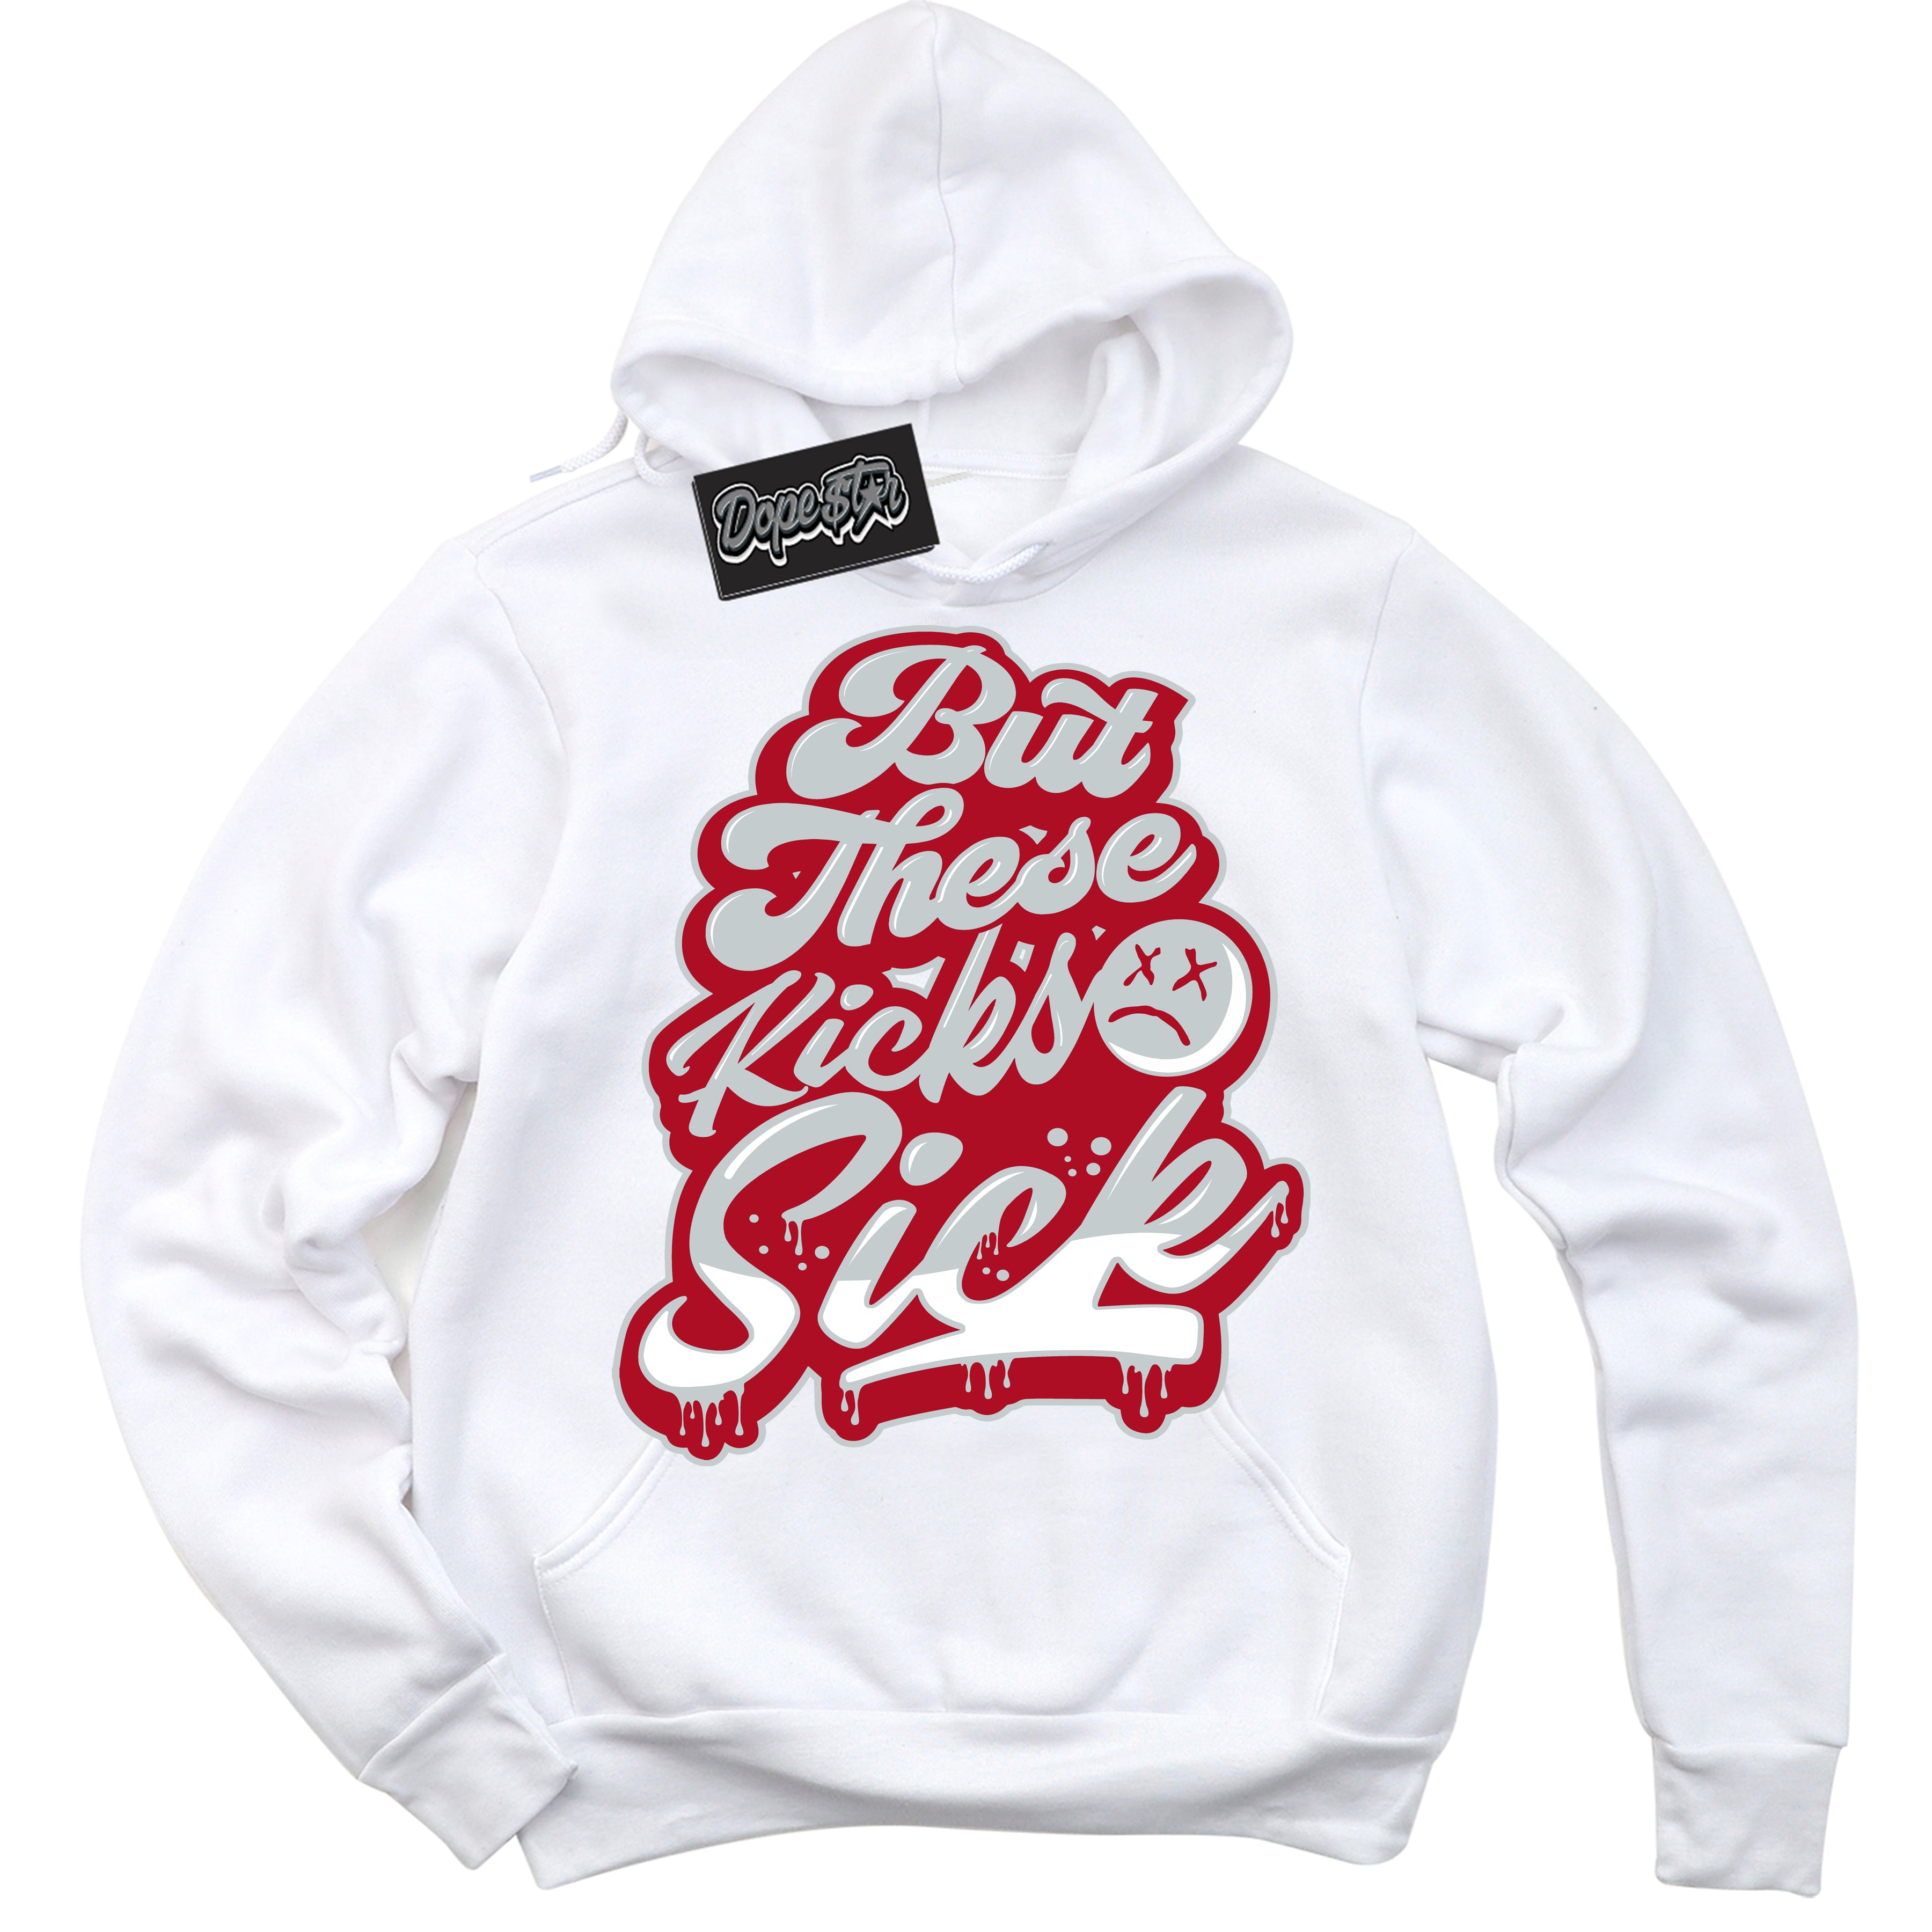 Cool White Hoodie with “ Kick Sick ”  design that Perfectly Matches  Reverse Ultraman Sneakers.